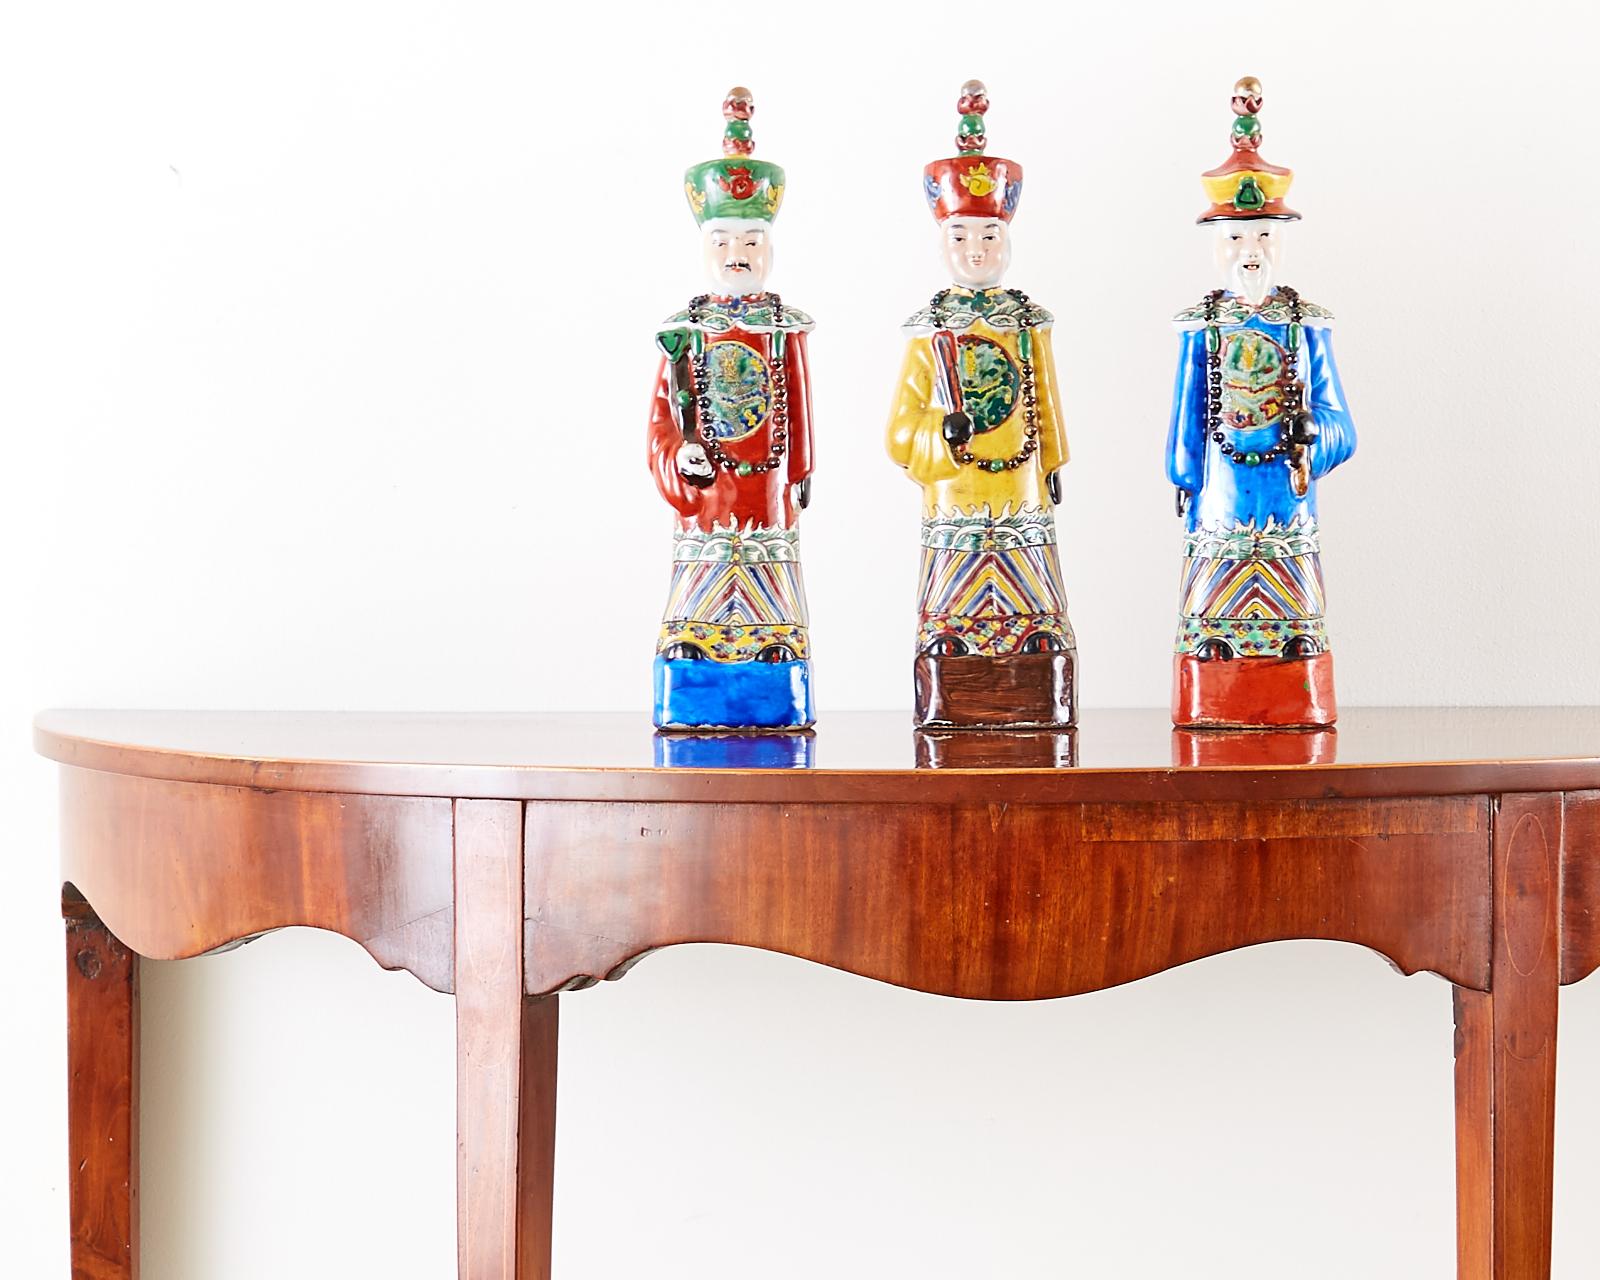 Colorful set of three Chinese porcelain Qing emperor, royal, and monarch figural group. Beautifully glazed with a wucai style having flamboyant robes and hats. Decorated with beaded necklaces with one holding a flute and the other a ruyi-head